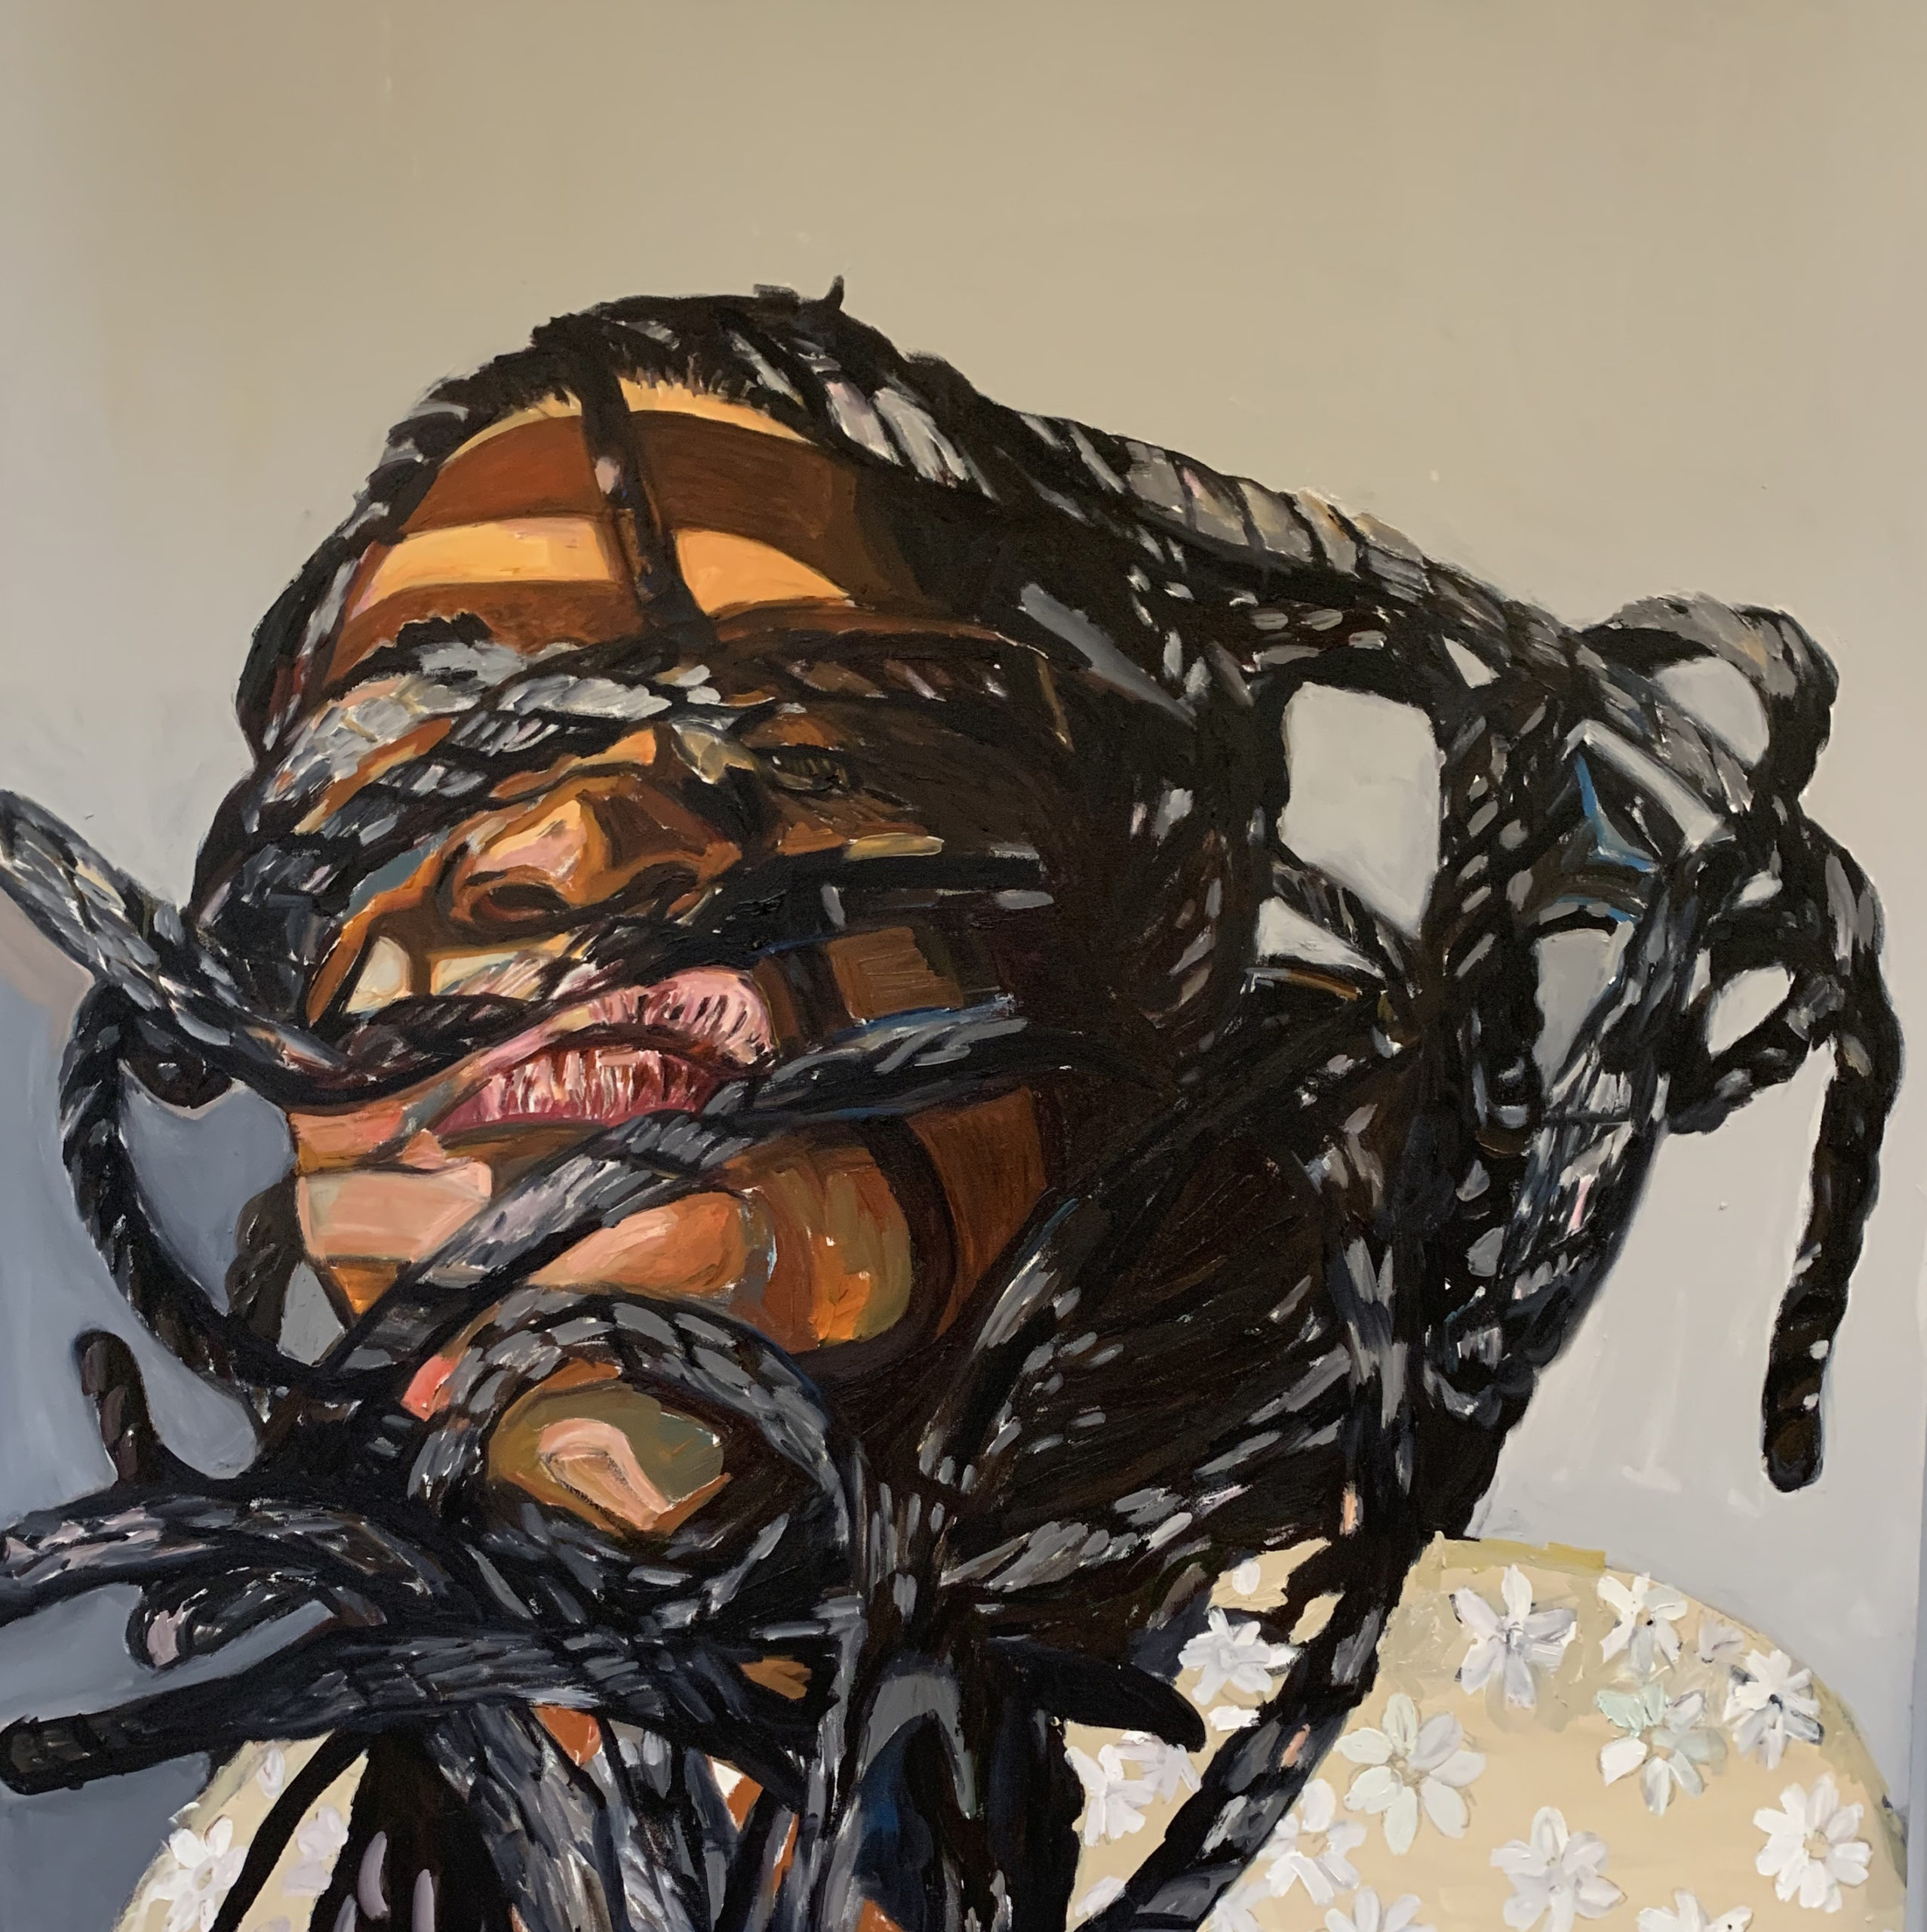 Defiant by Beverly McIver, oil on canvas, 48 x 48 at Craven Allen Gallery  50,000